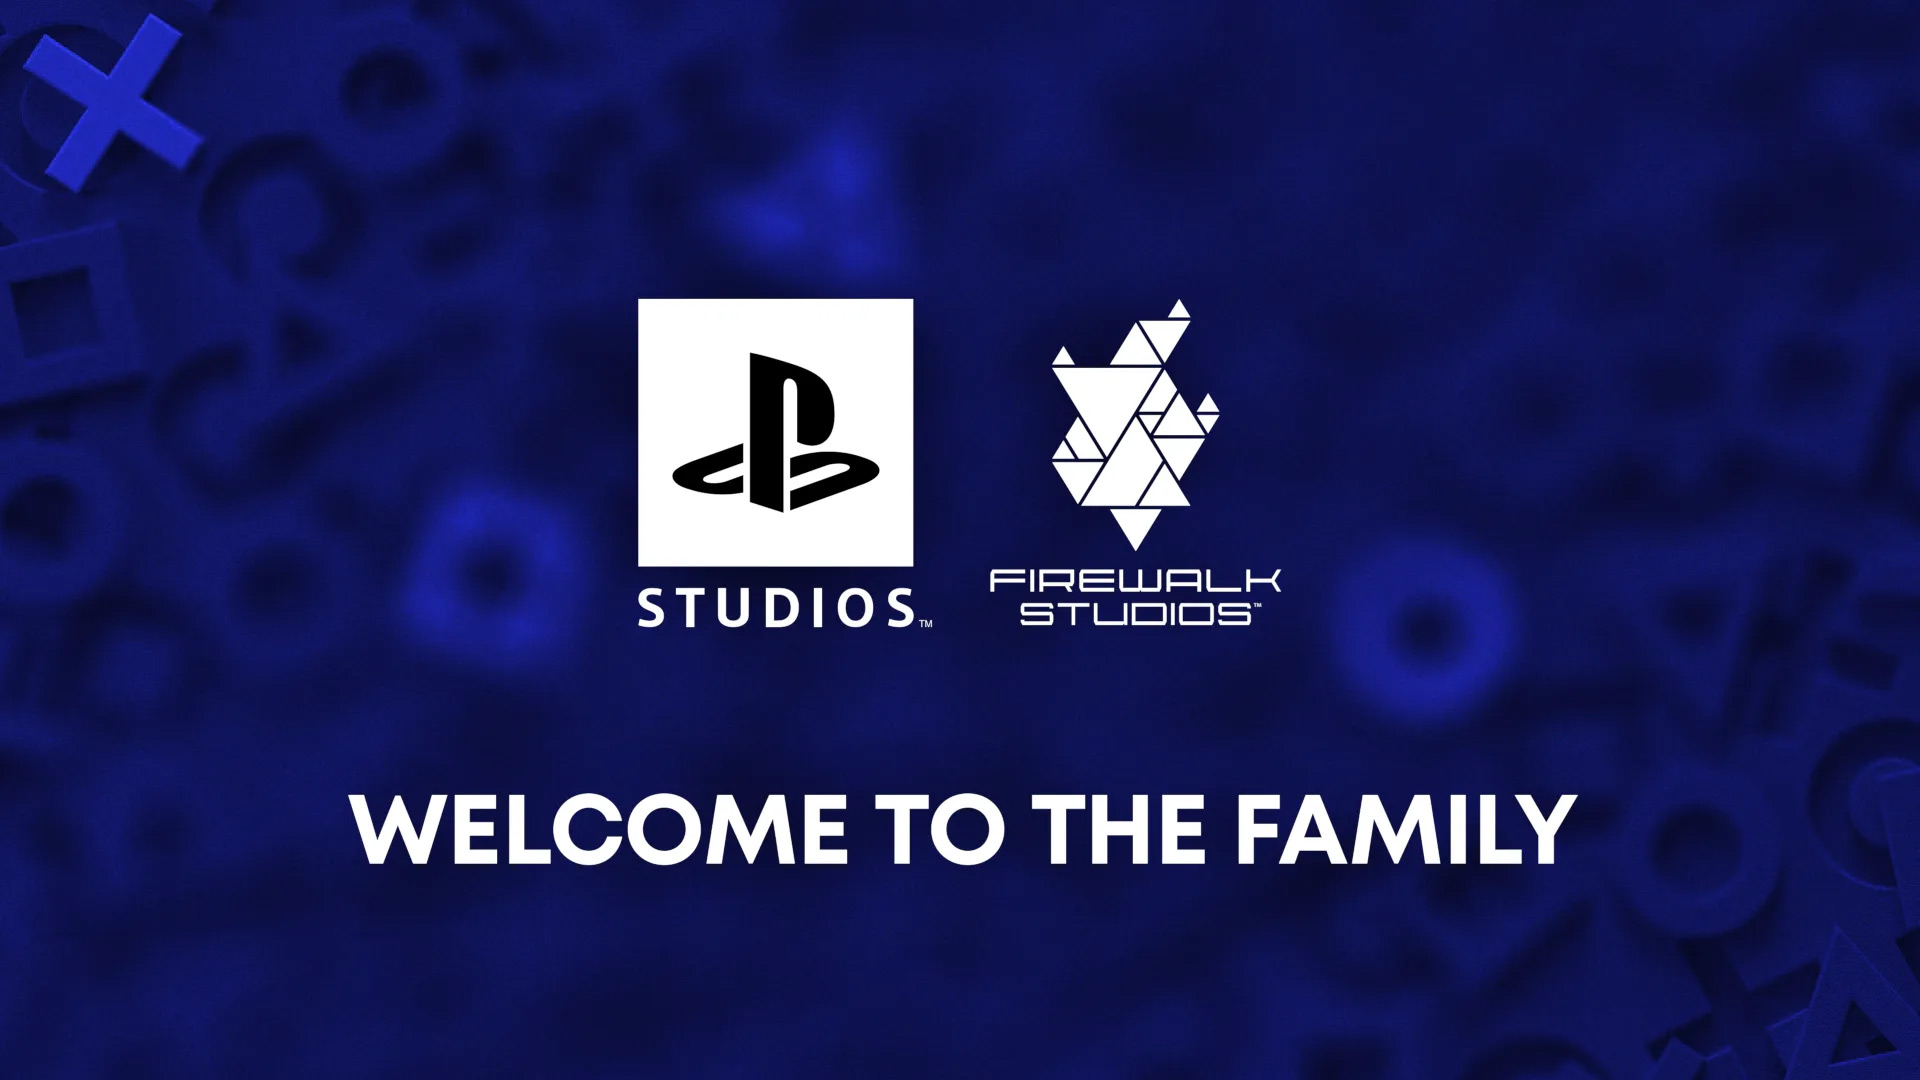 Firewalk Studios is now part of the PlayStation family